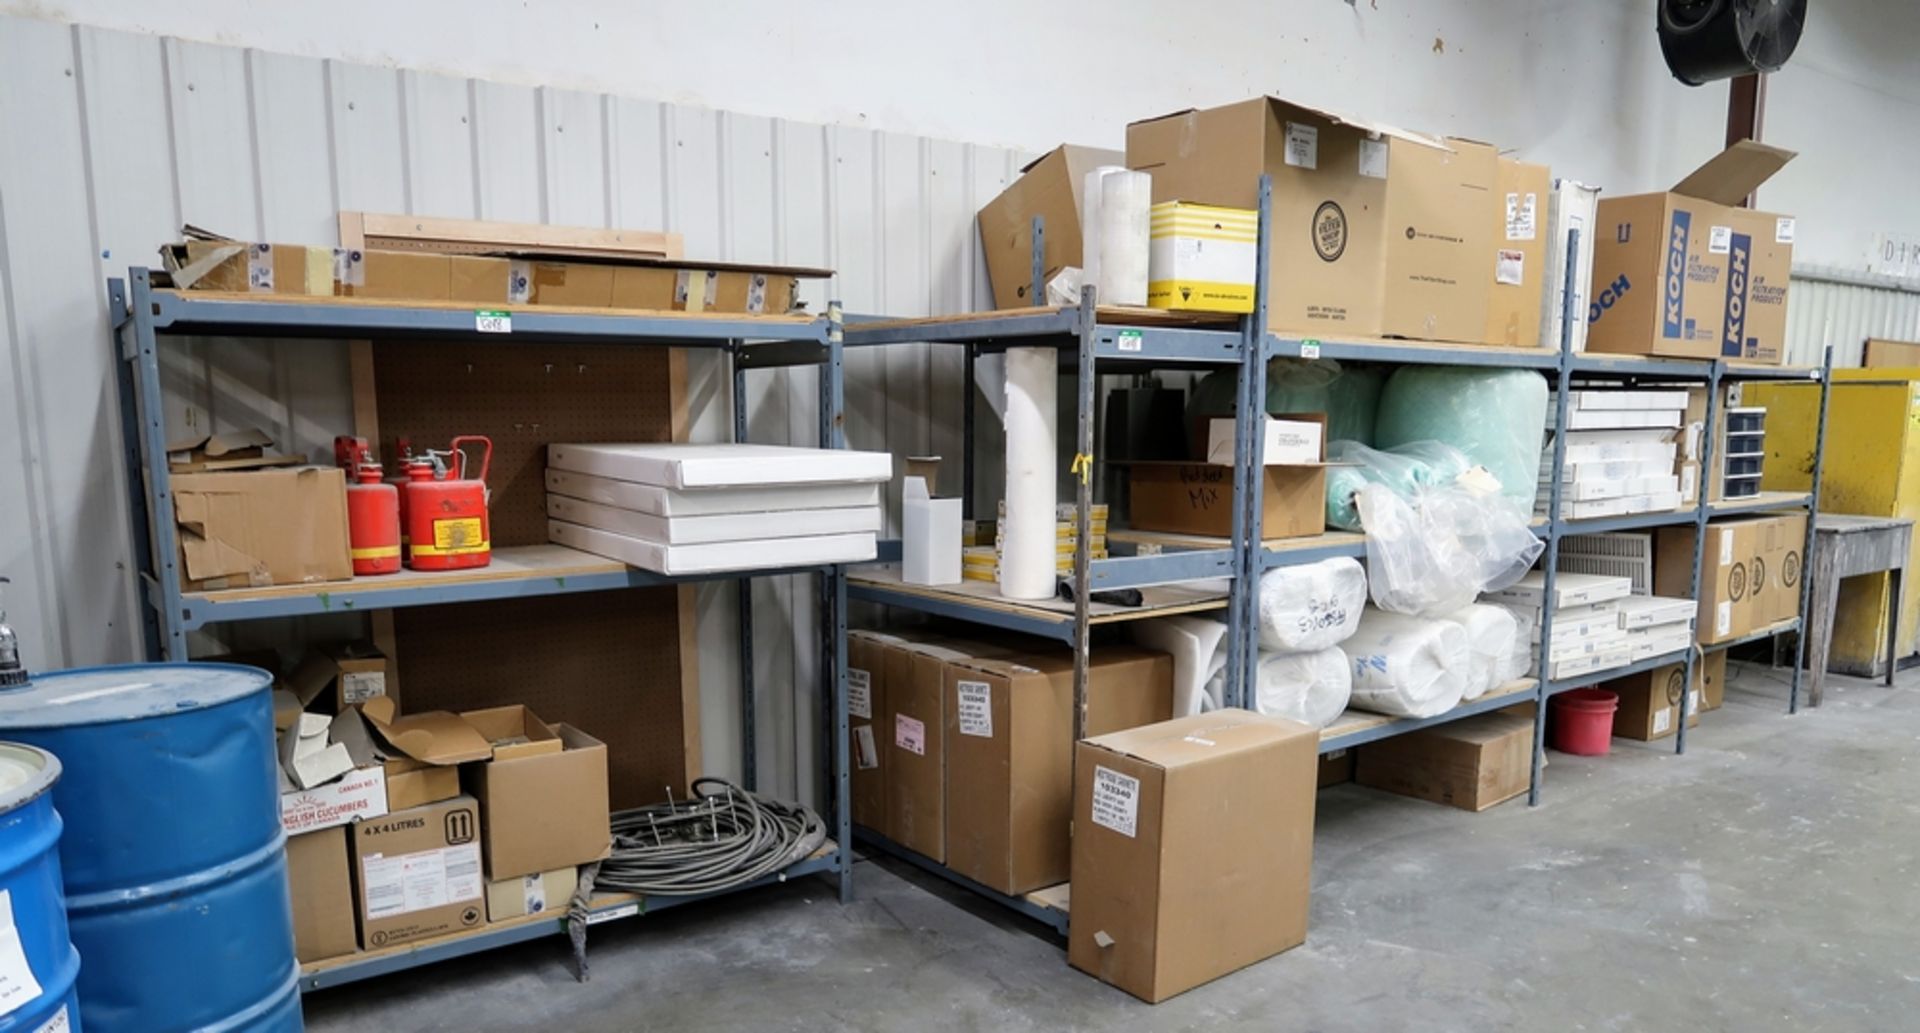 5 SECTIONS OF REDIRACK SHELVING